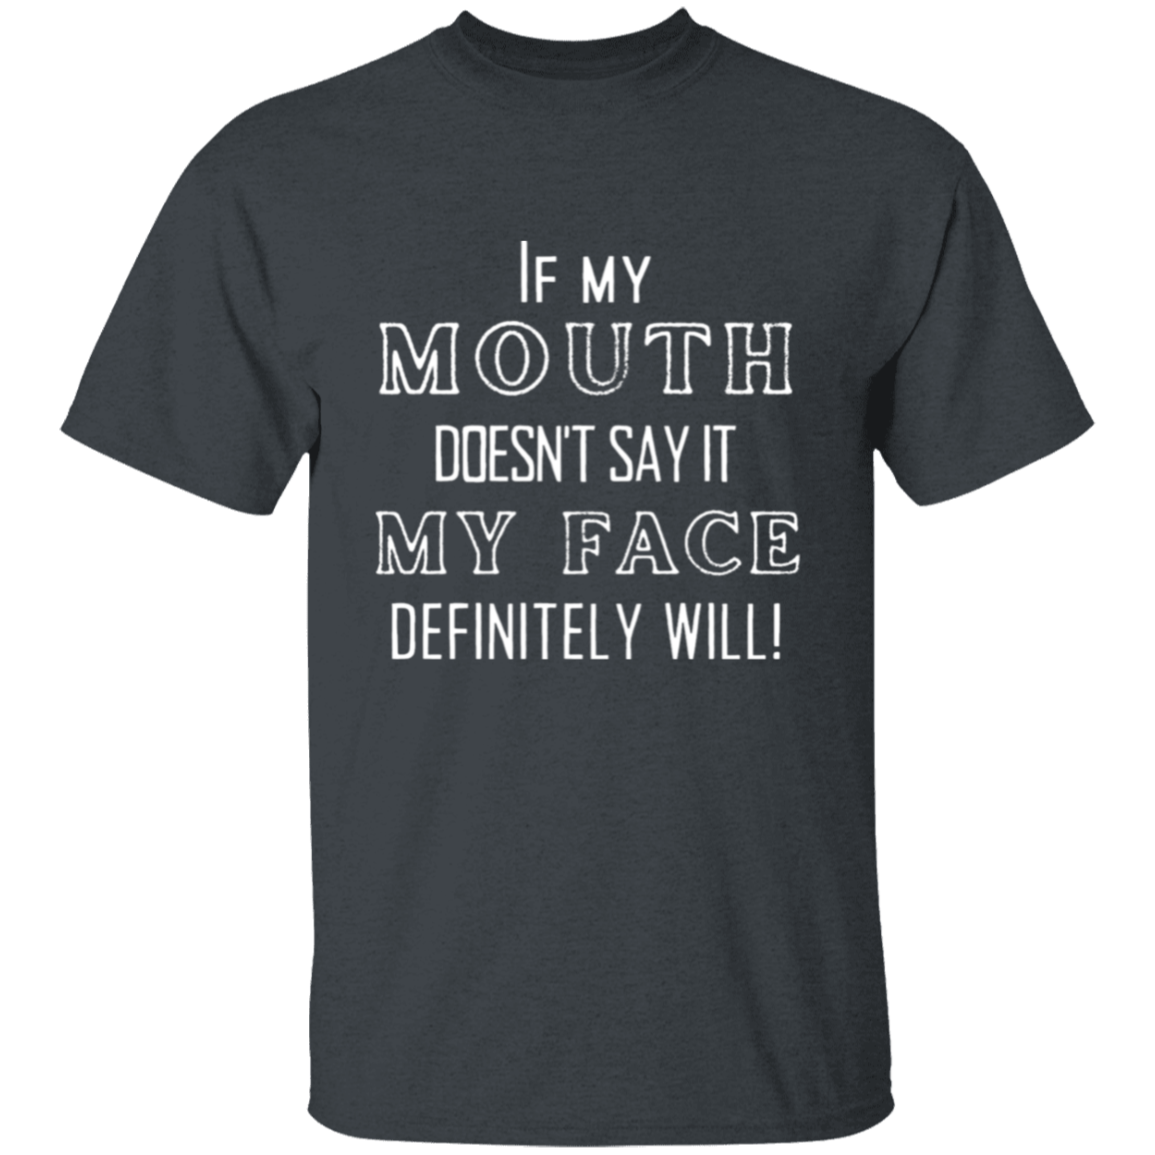 My Mouth My Face Fun Humor Printed T-Shirt, Funny Tee